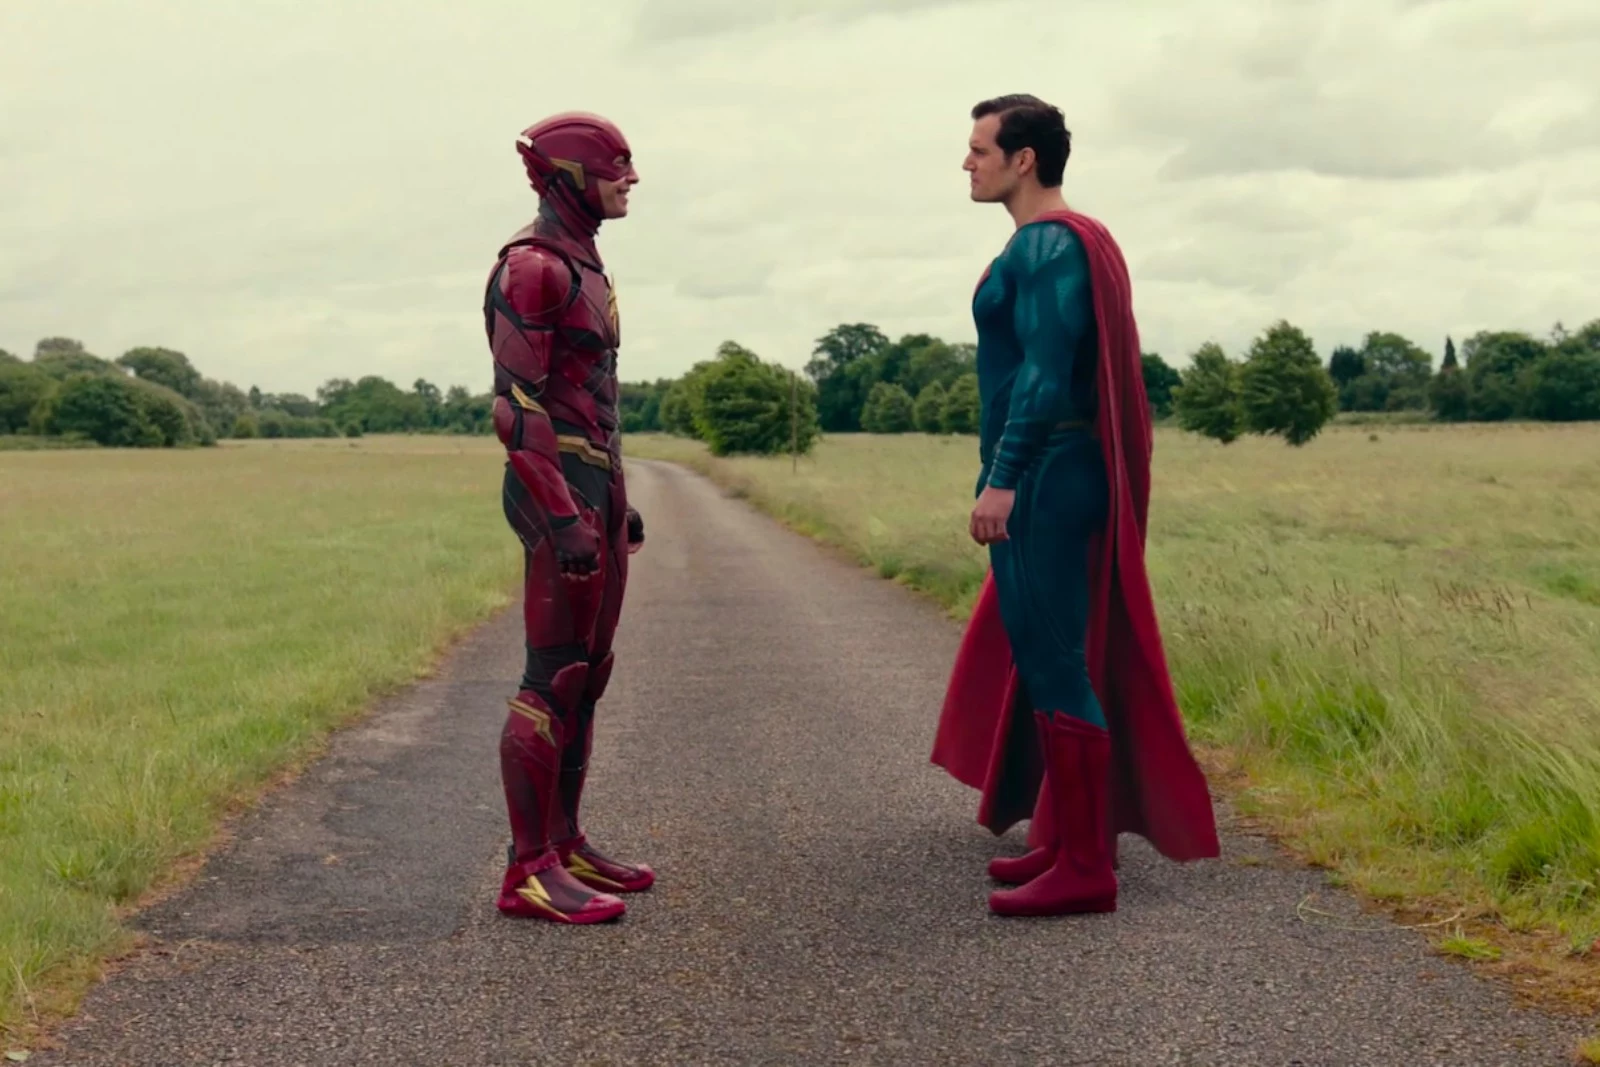 You Can Now Watch 'Justice League's Post-Credit Scenes Online